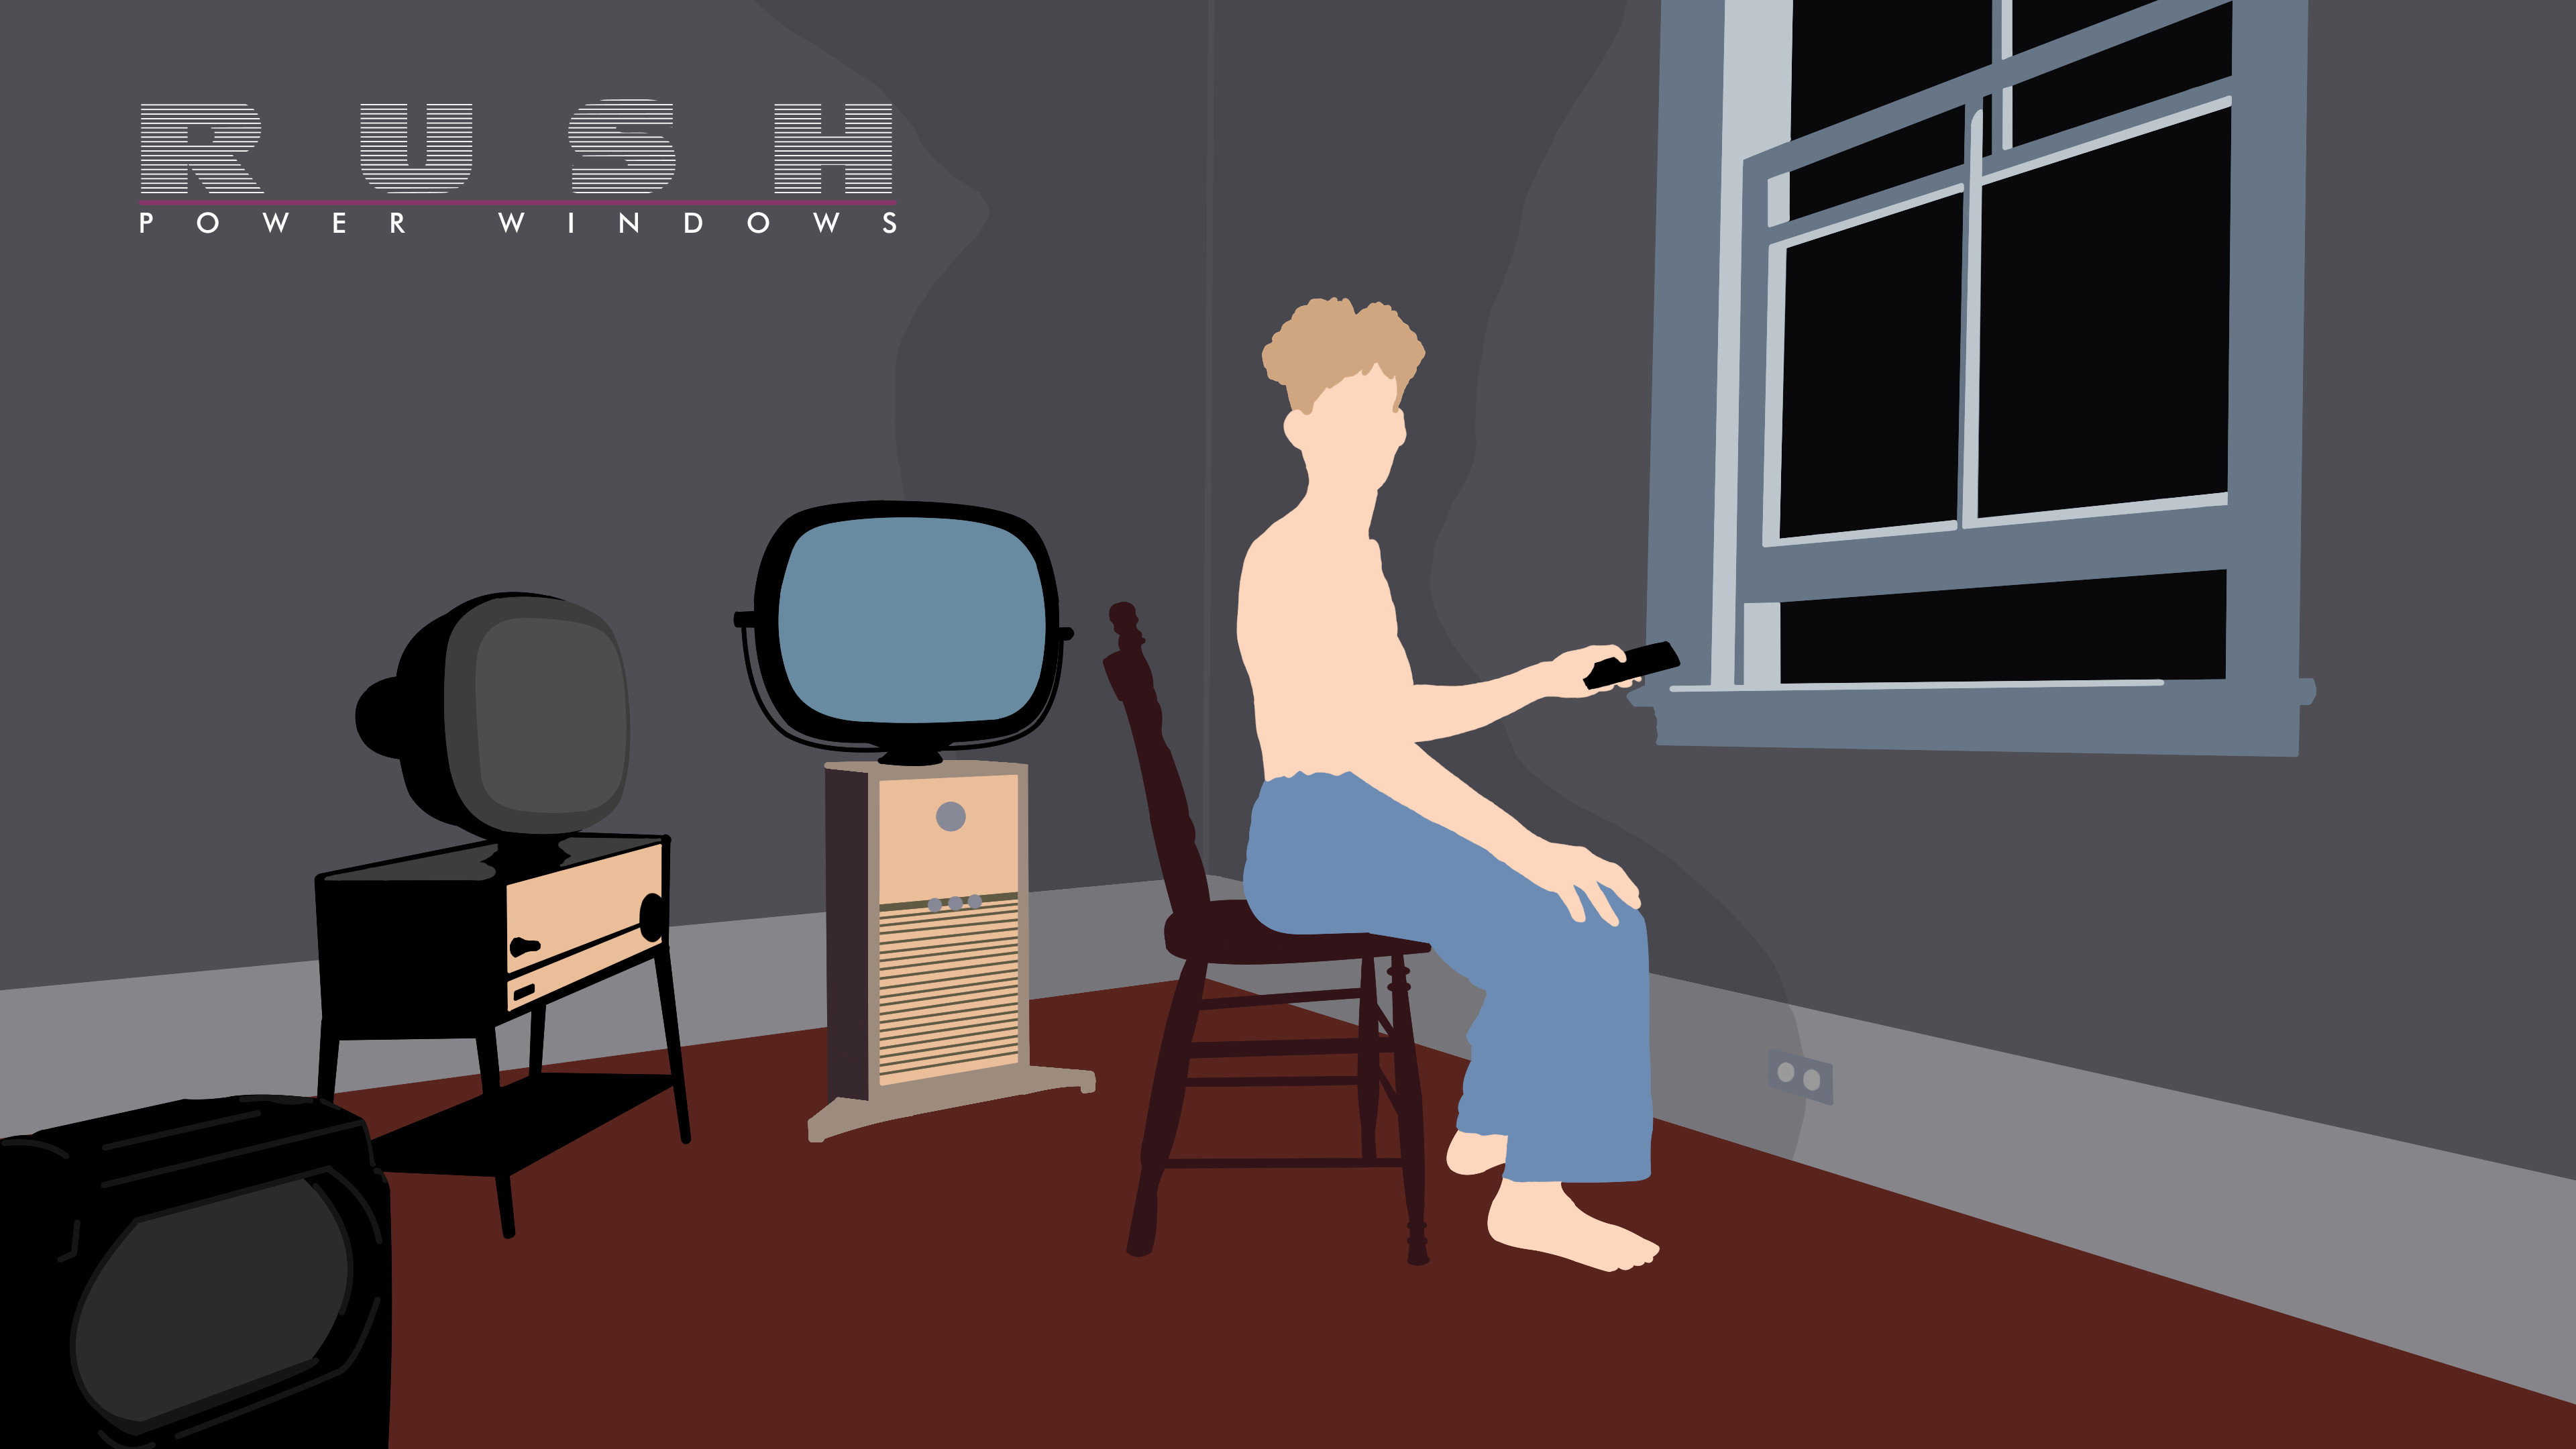 3840x2160 It's been a while, but here's a new Rush album wallpaper: Power Windows ...